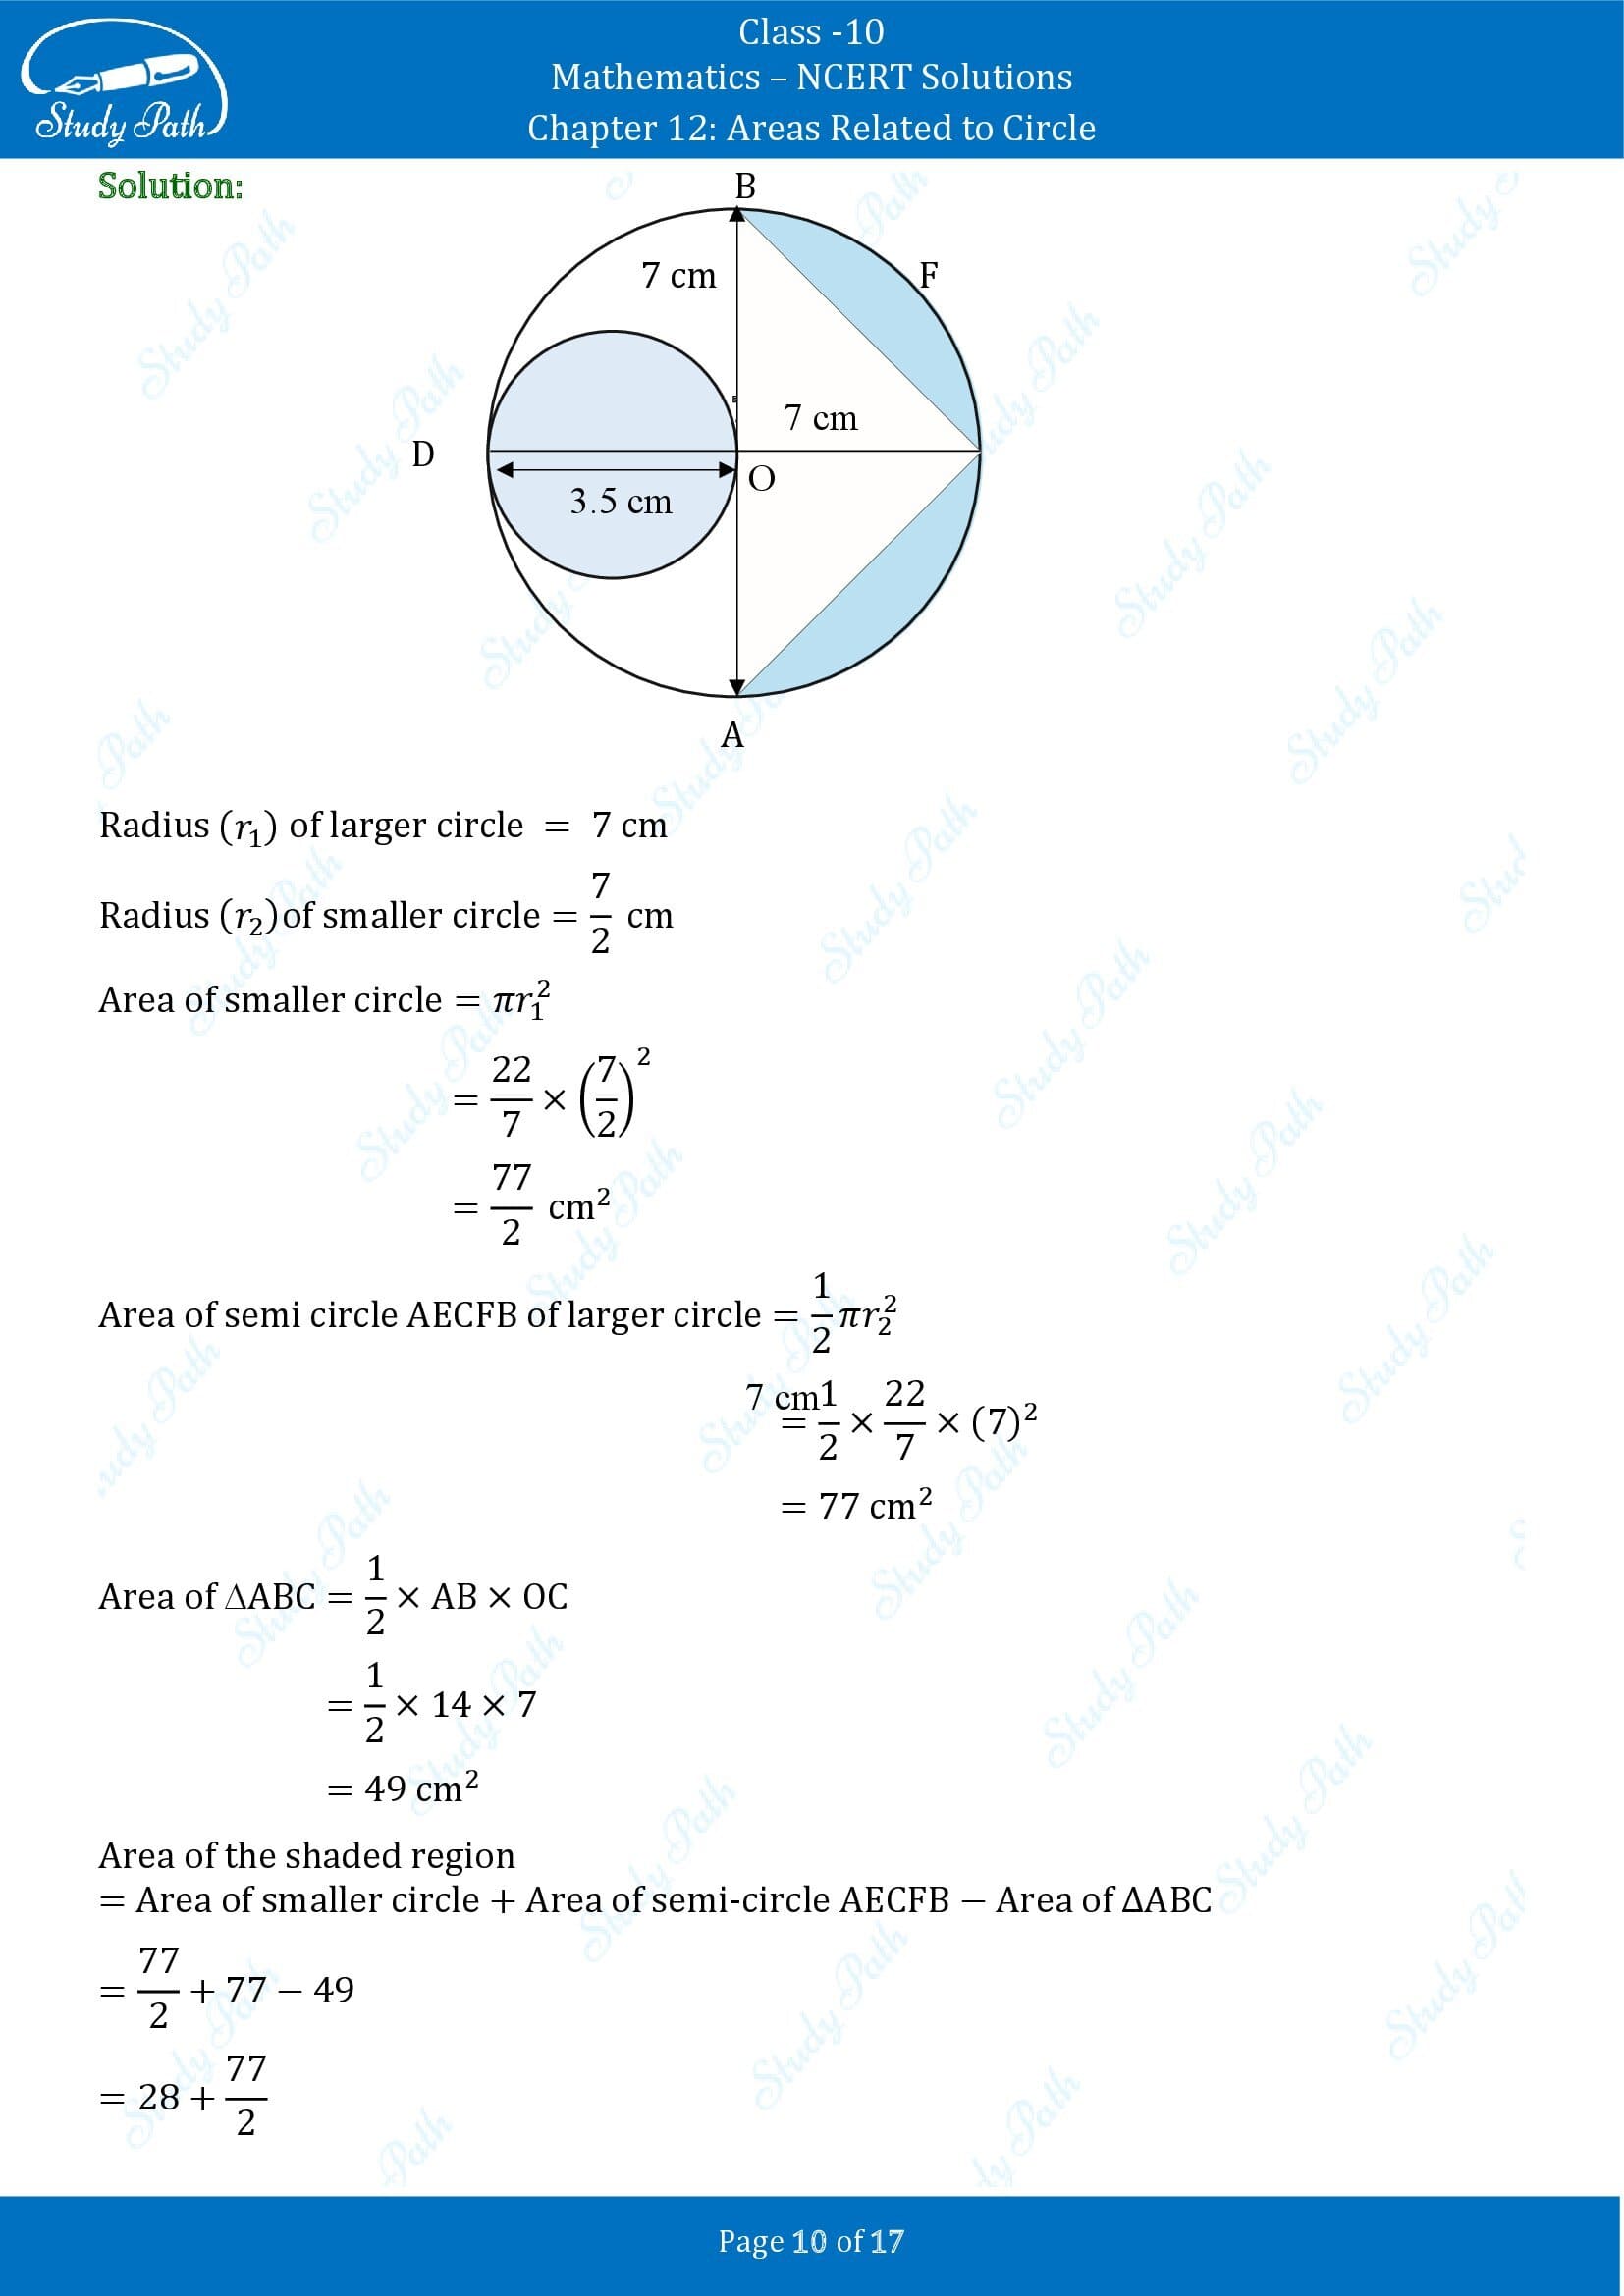 NCERT Solutions for Class 10 Maths Chapter 12 Areas Related to Circles Exercise 12.3 00010